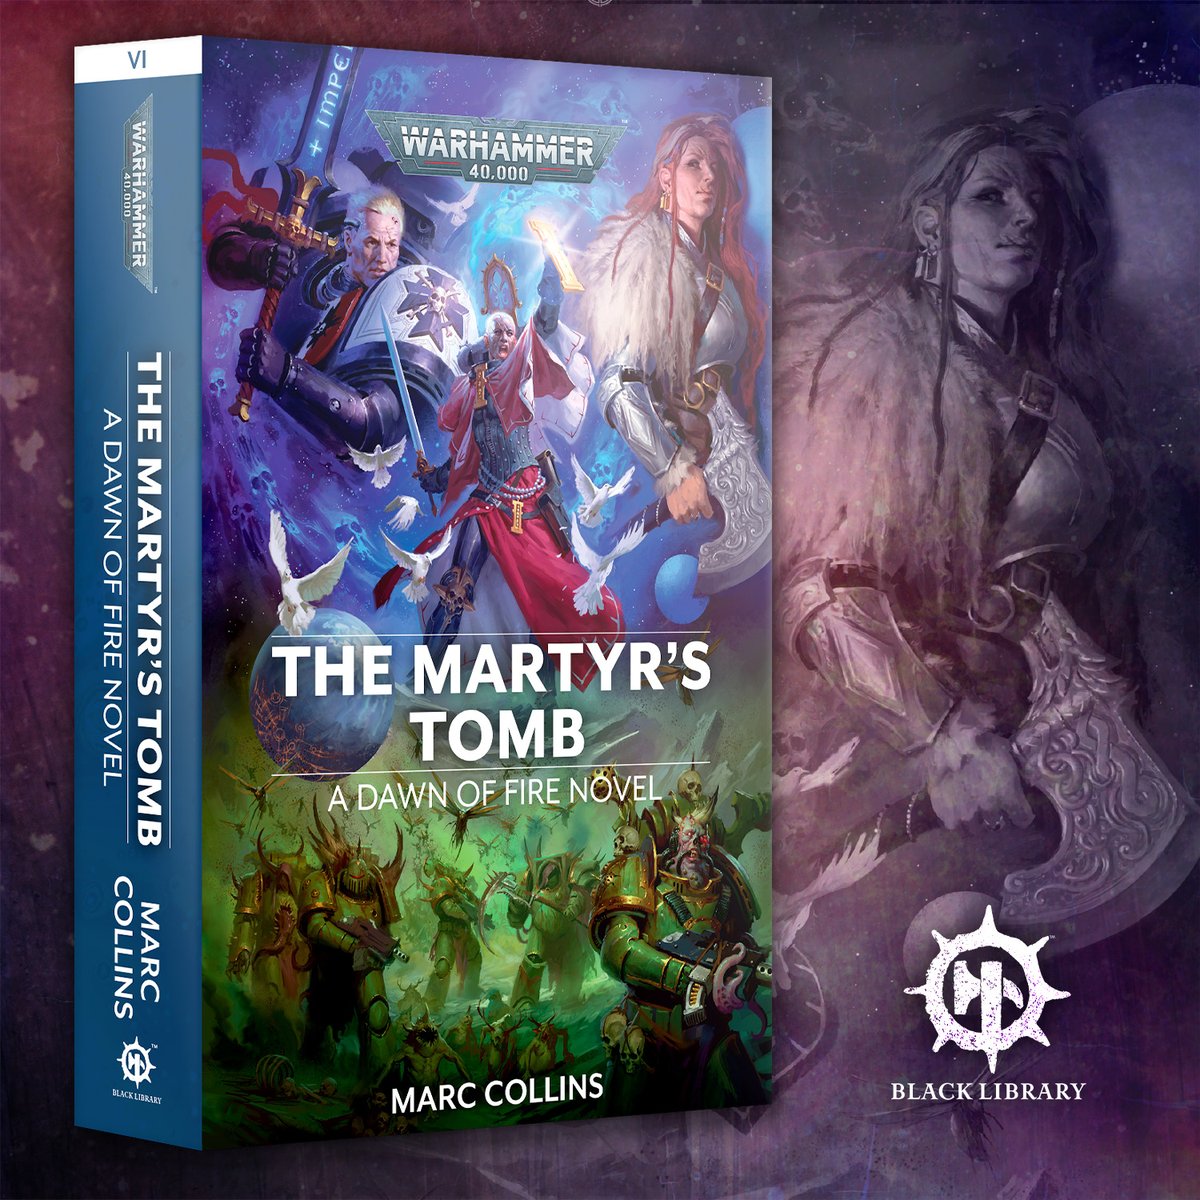 The Martyr's Tomb by @MalkyDel is the next book in the epic Dawn of Fire series! 

Find out more about the next part of the saga. bit.ly/42aAJYh 

#WarhammerCommunity #BlackLibrary